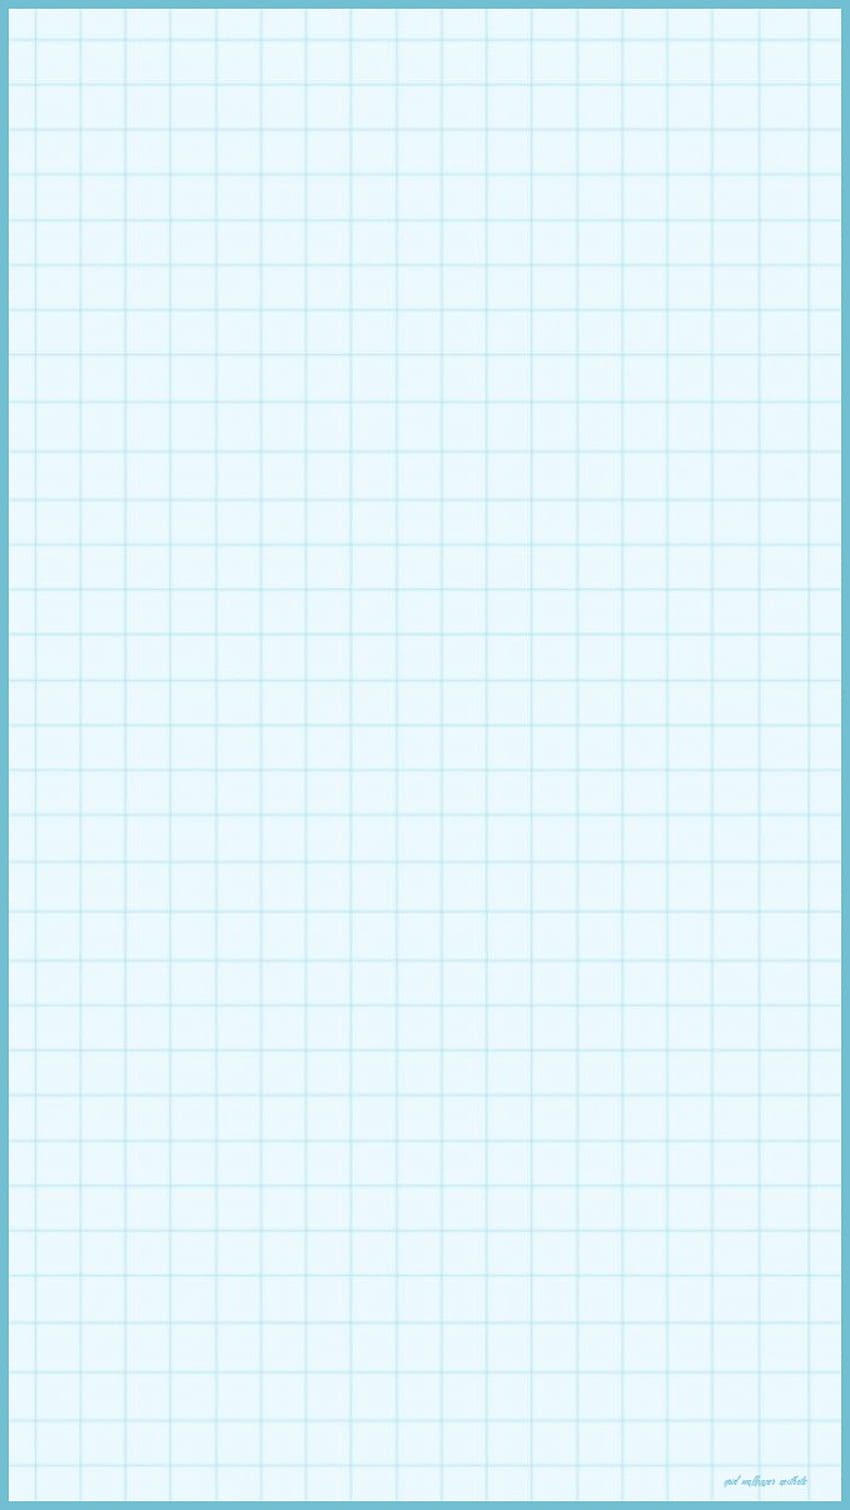 Free printable graph paper with a blue border and a 5mm grid. - Grid